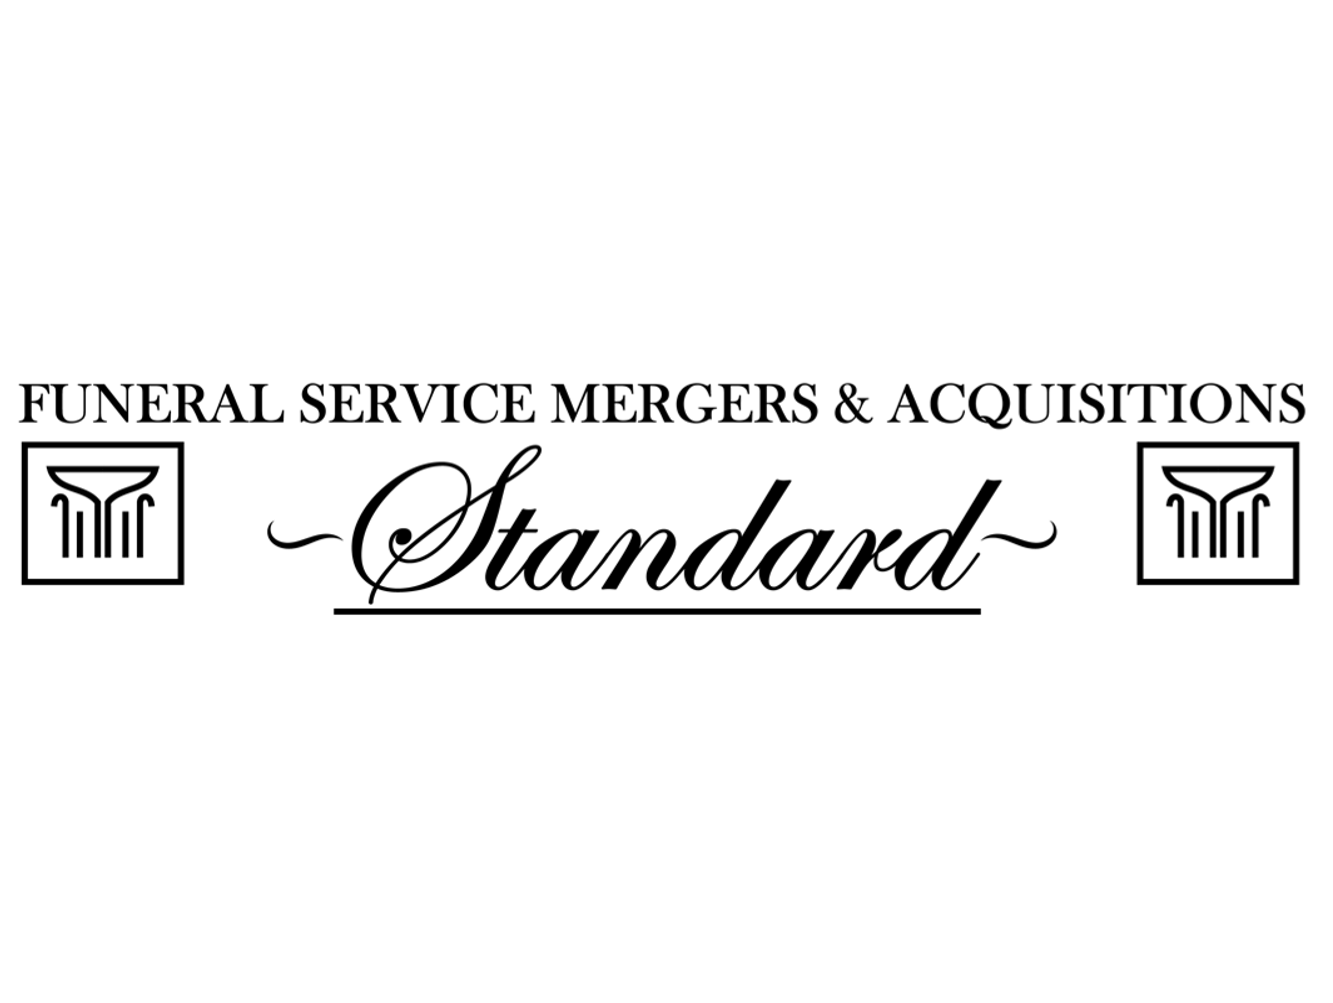 Standard Funeral Service Mergers & Acquisitions